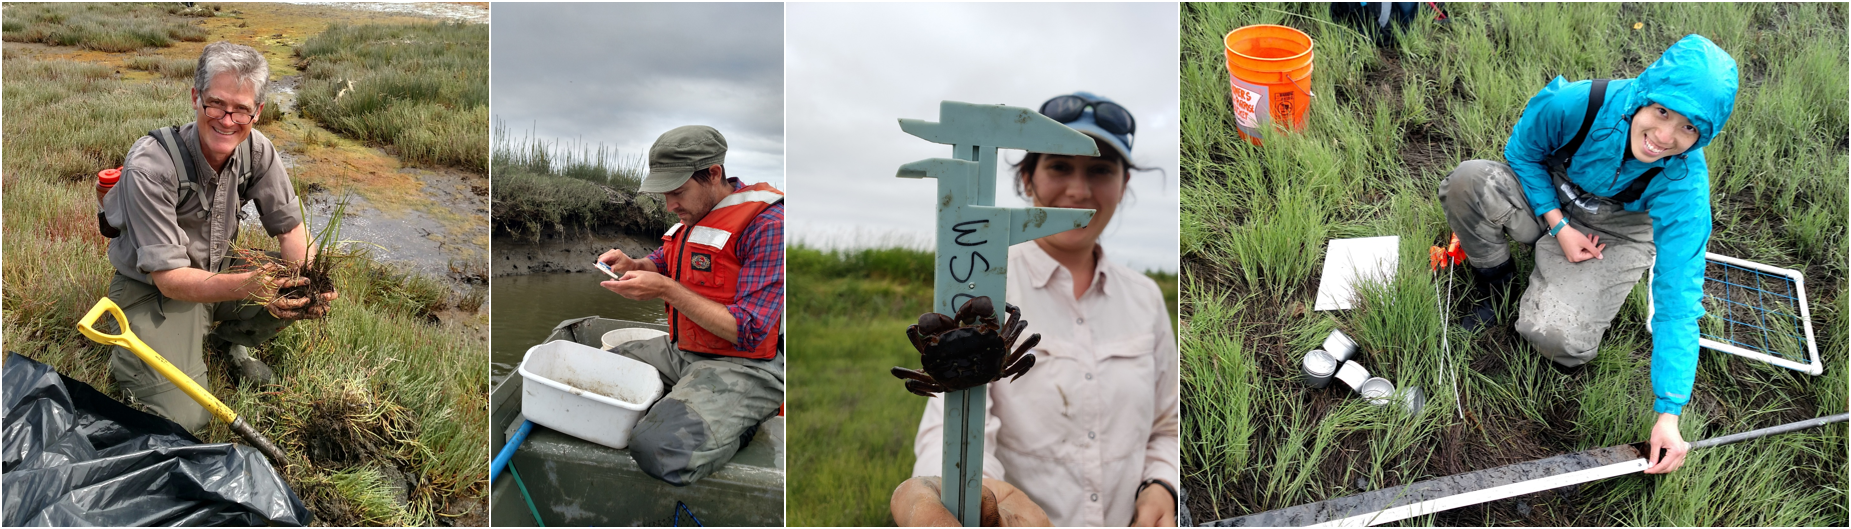 Set of pictures showing Padilla Bay stewardship activities including a man digging invasive spartina cordgrass, a man in a boat setting out crab traps, a woman measuring a crab, and a volunteer working in Padilla Bay's eelgrass.